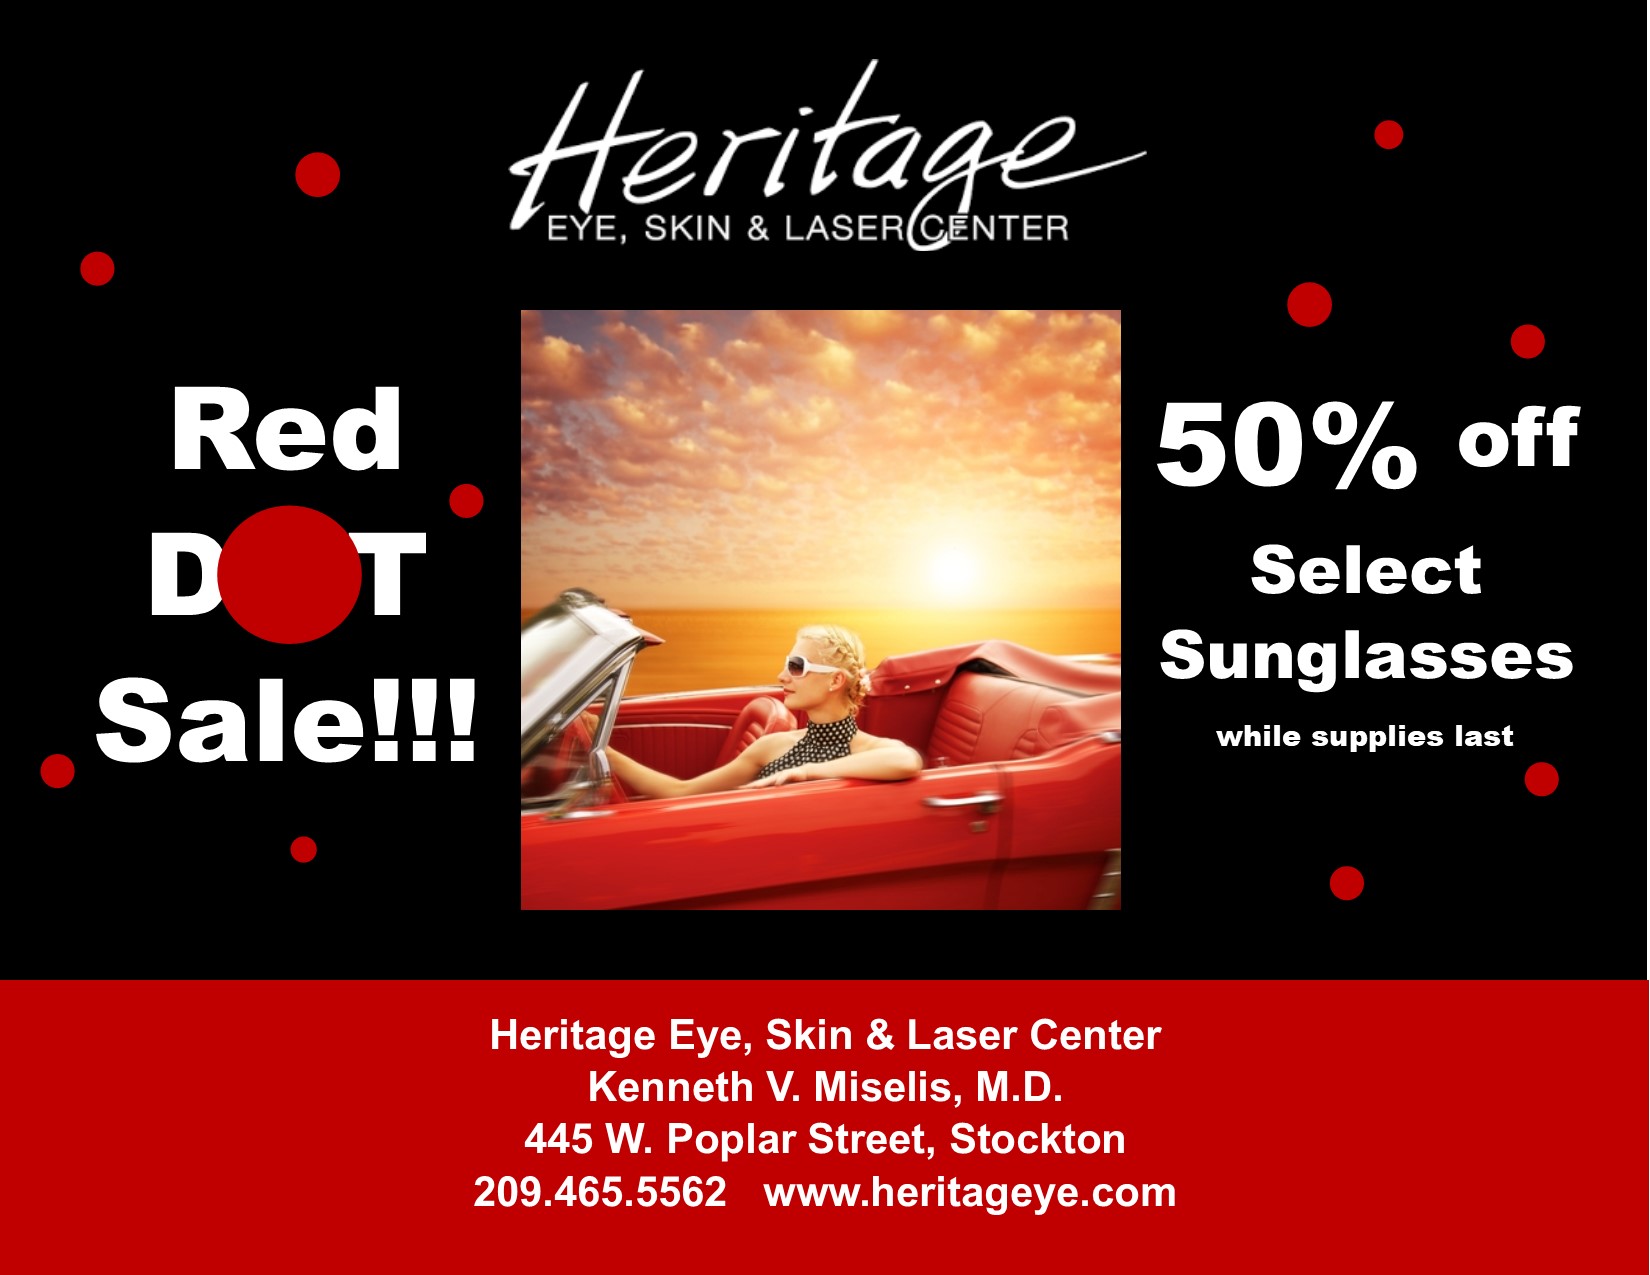 Don’t Miss Our Red Dot Sunglass Sale!